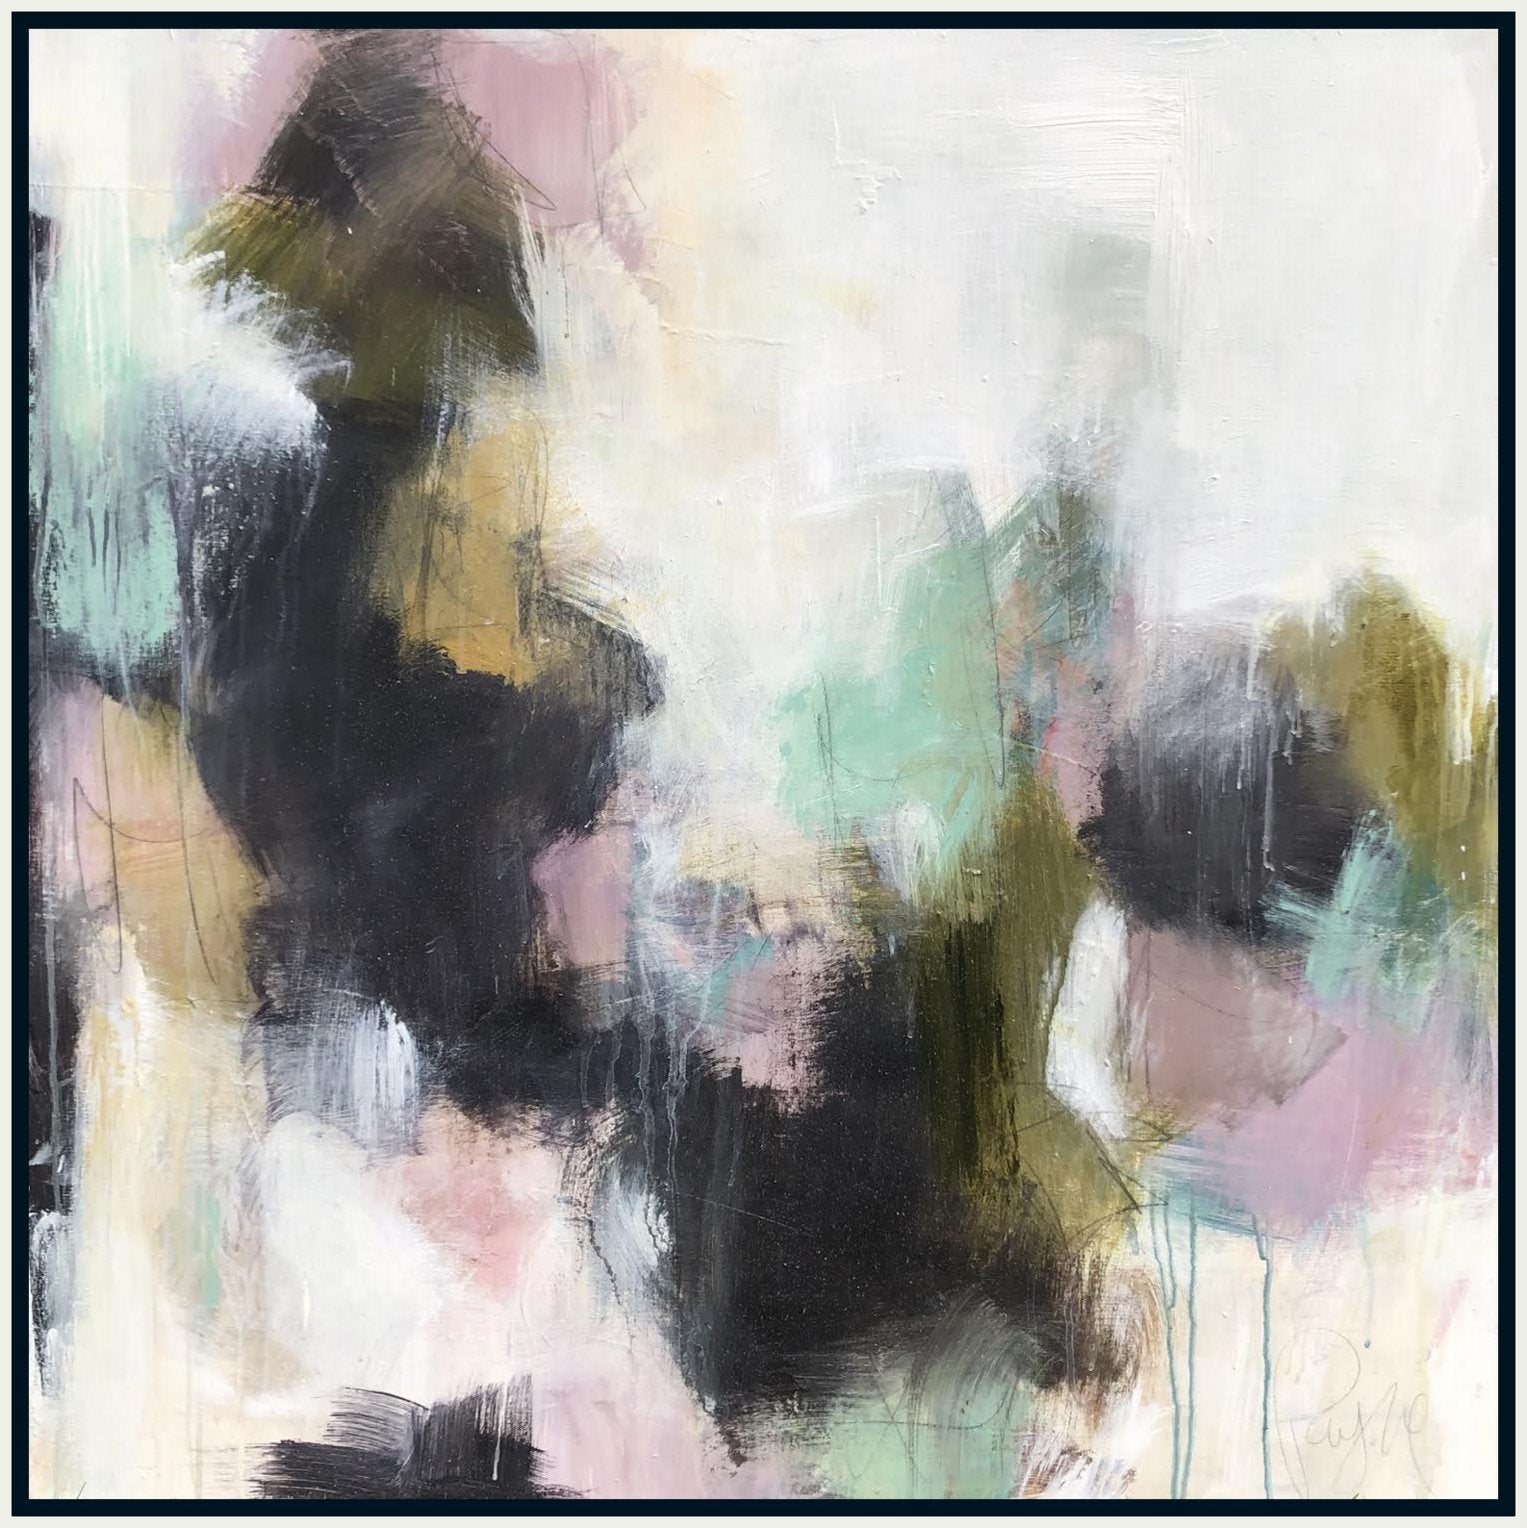 This new painting by <a href="https://huffharrington.com/collections/melissa-payne-baker" target="_blank">Melissa Payne Baker</a> is another great example of an abstract paintings with perfect balance and composition.